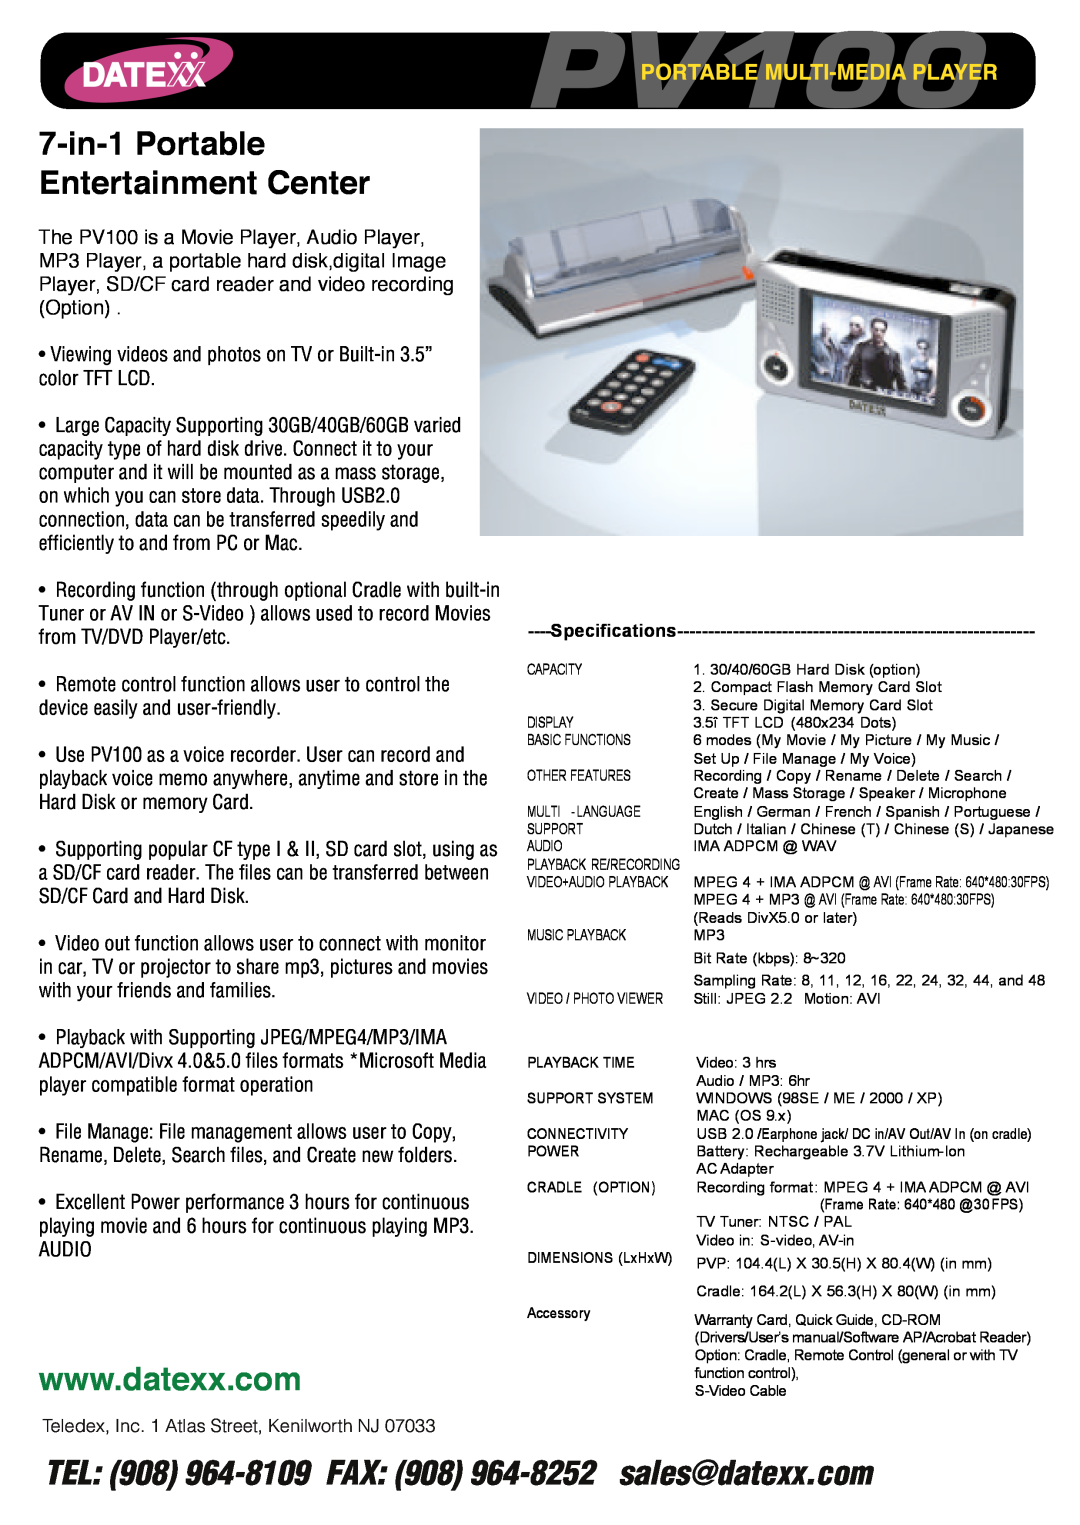 Datexx PV100 specifications 7-in-1Portable Entertainment Center 